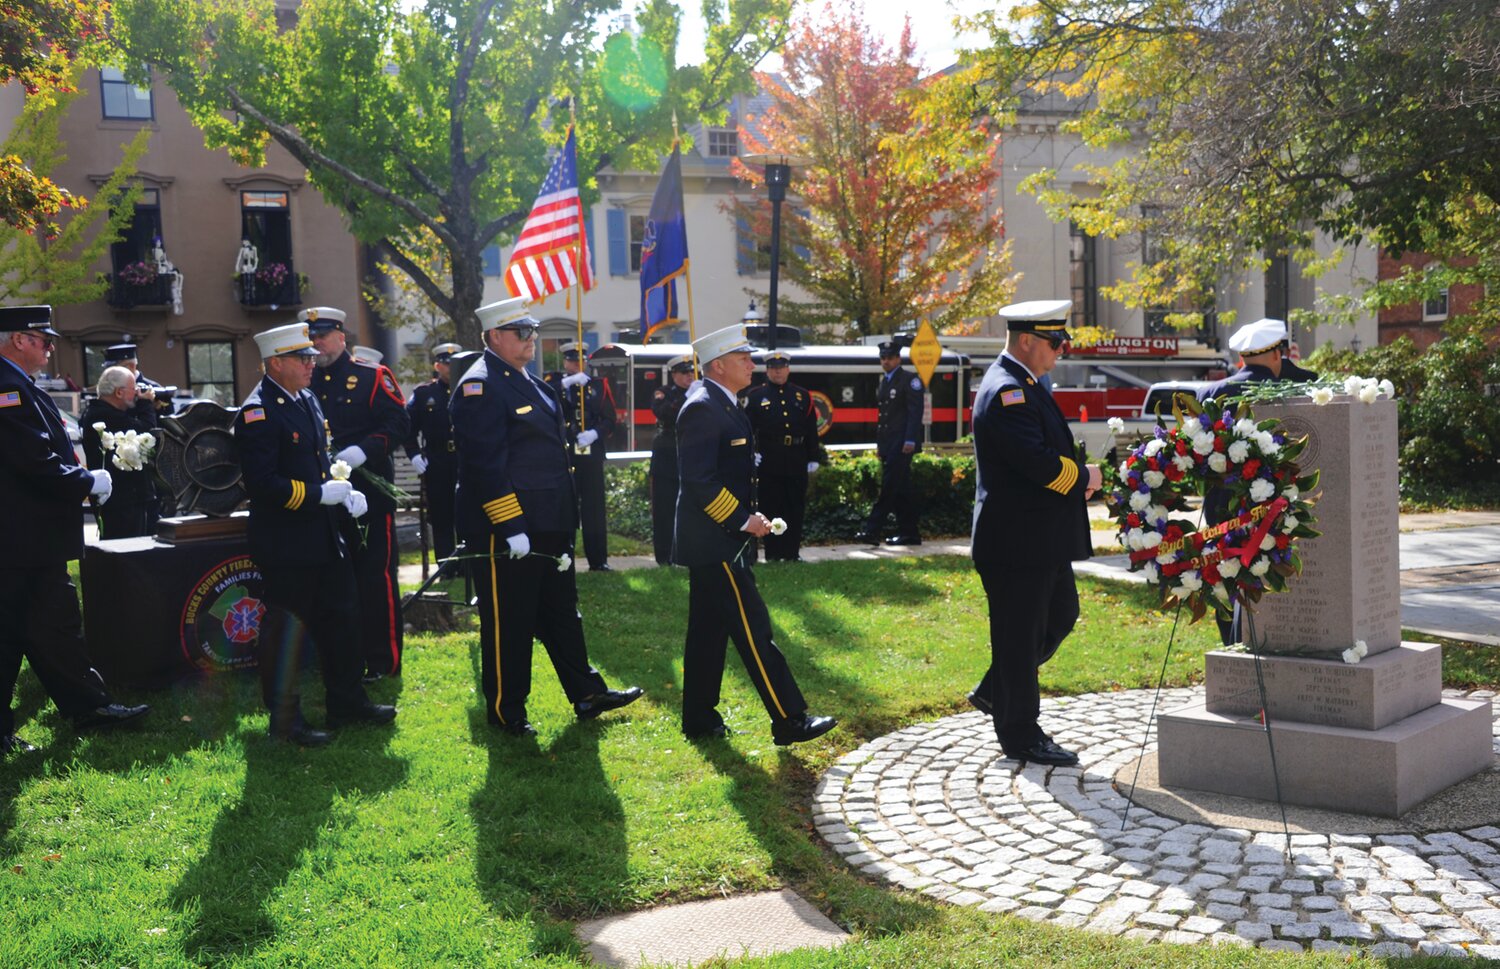 First responders place carnations in remembrance of Bucks County’s fallen firefighters.